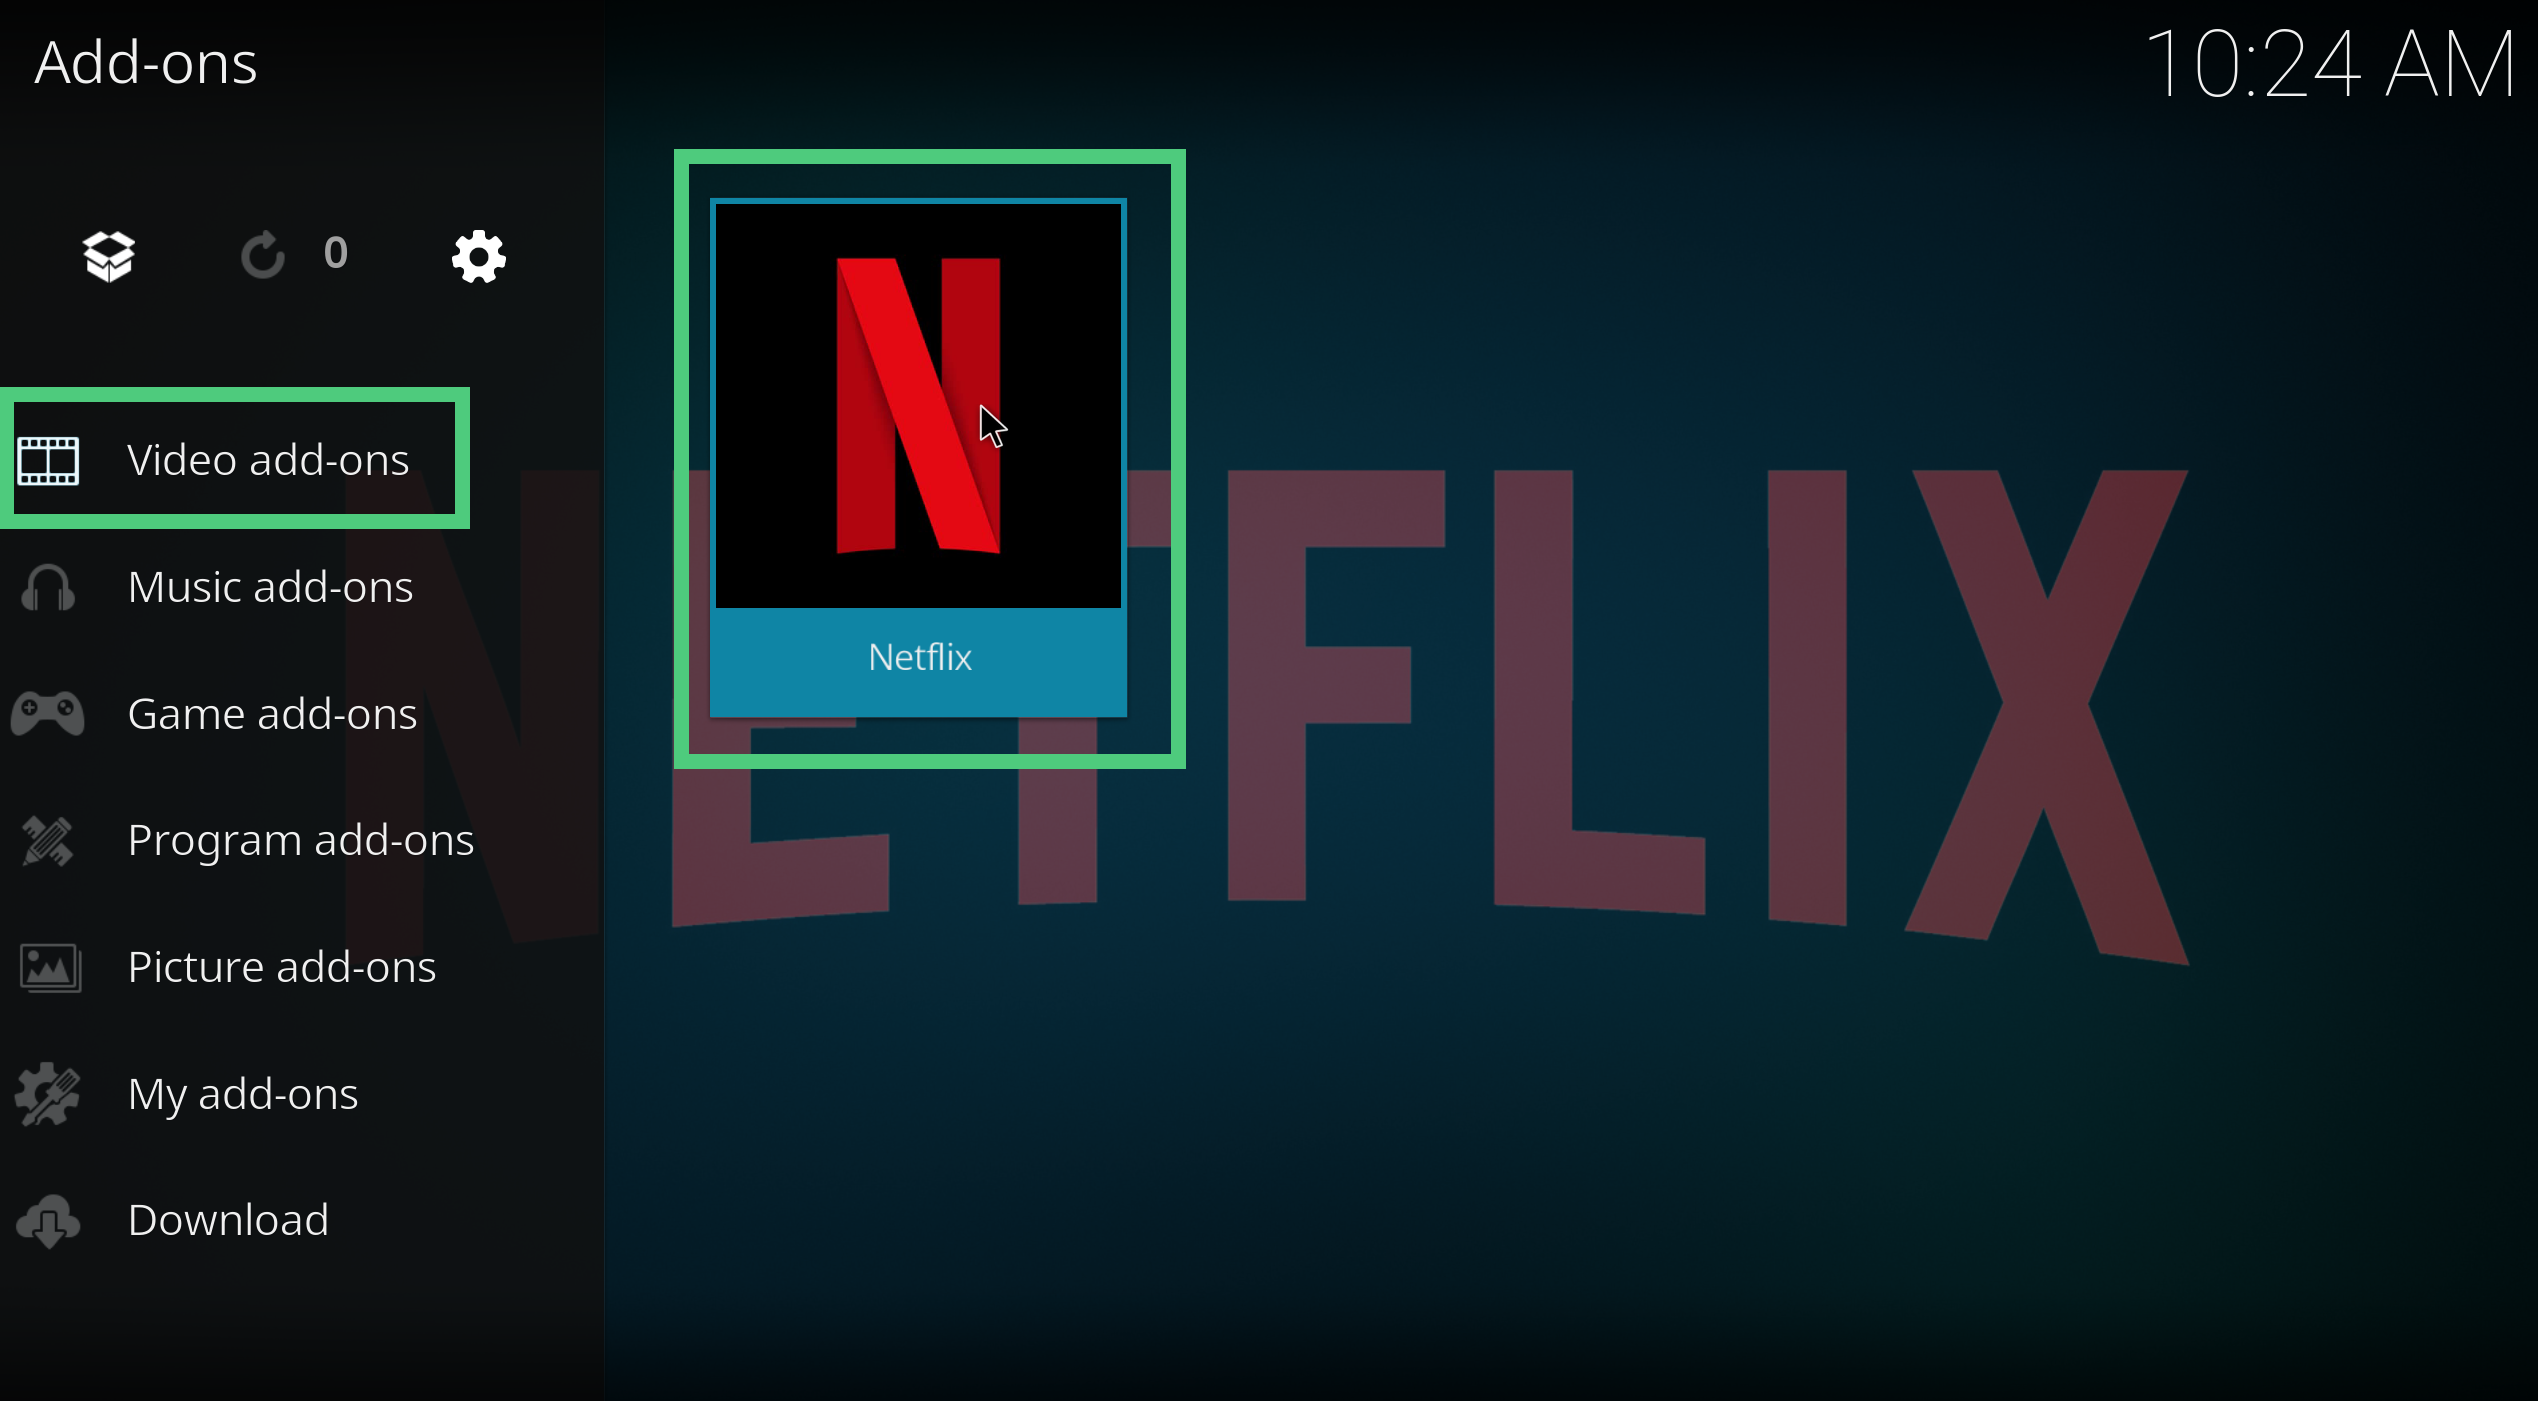 A screenshot showing how to configure the Netflix add-on in Kodi